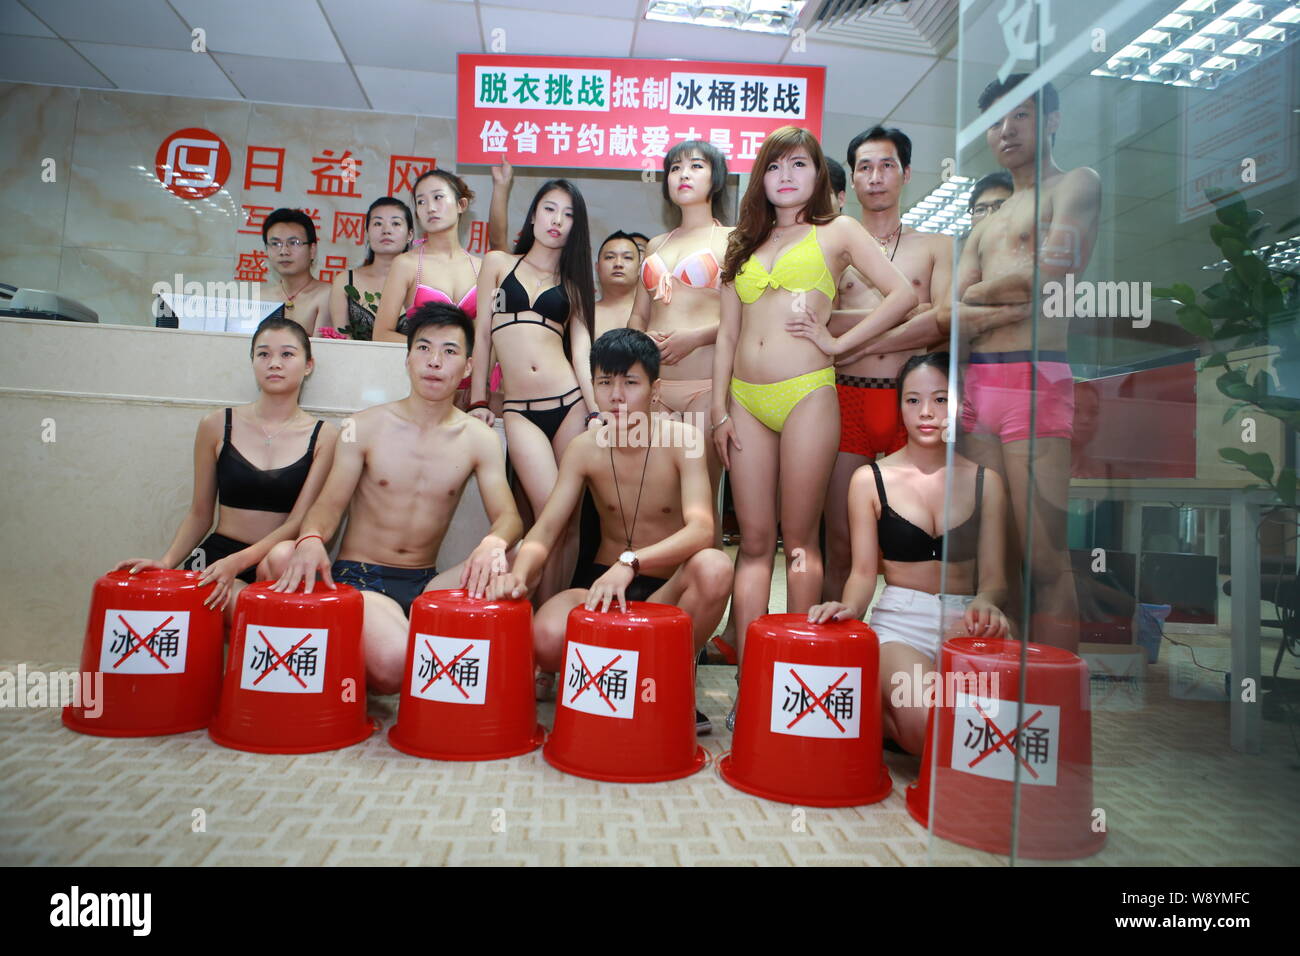 Chinese employees dressed in bikinis and swimming trunks pose behind empty buckets to boycott the Ice Bucket Challenge at their office in Shenzhen cit Stock Photo